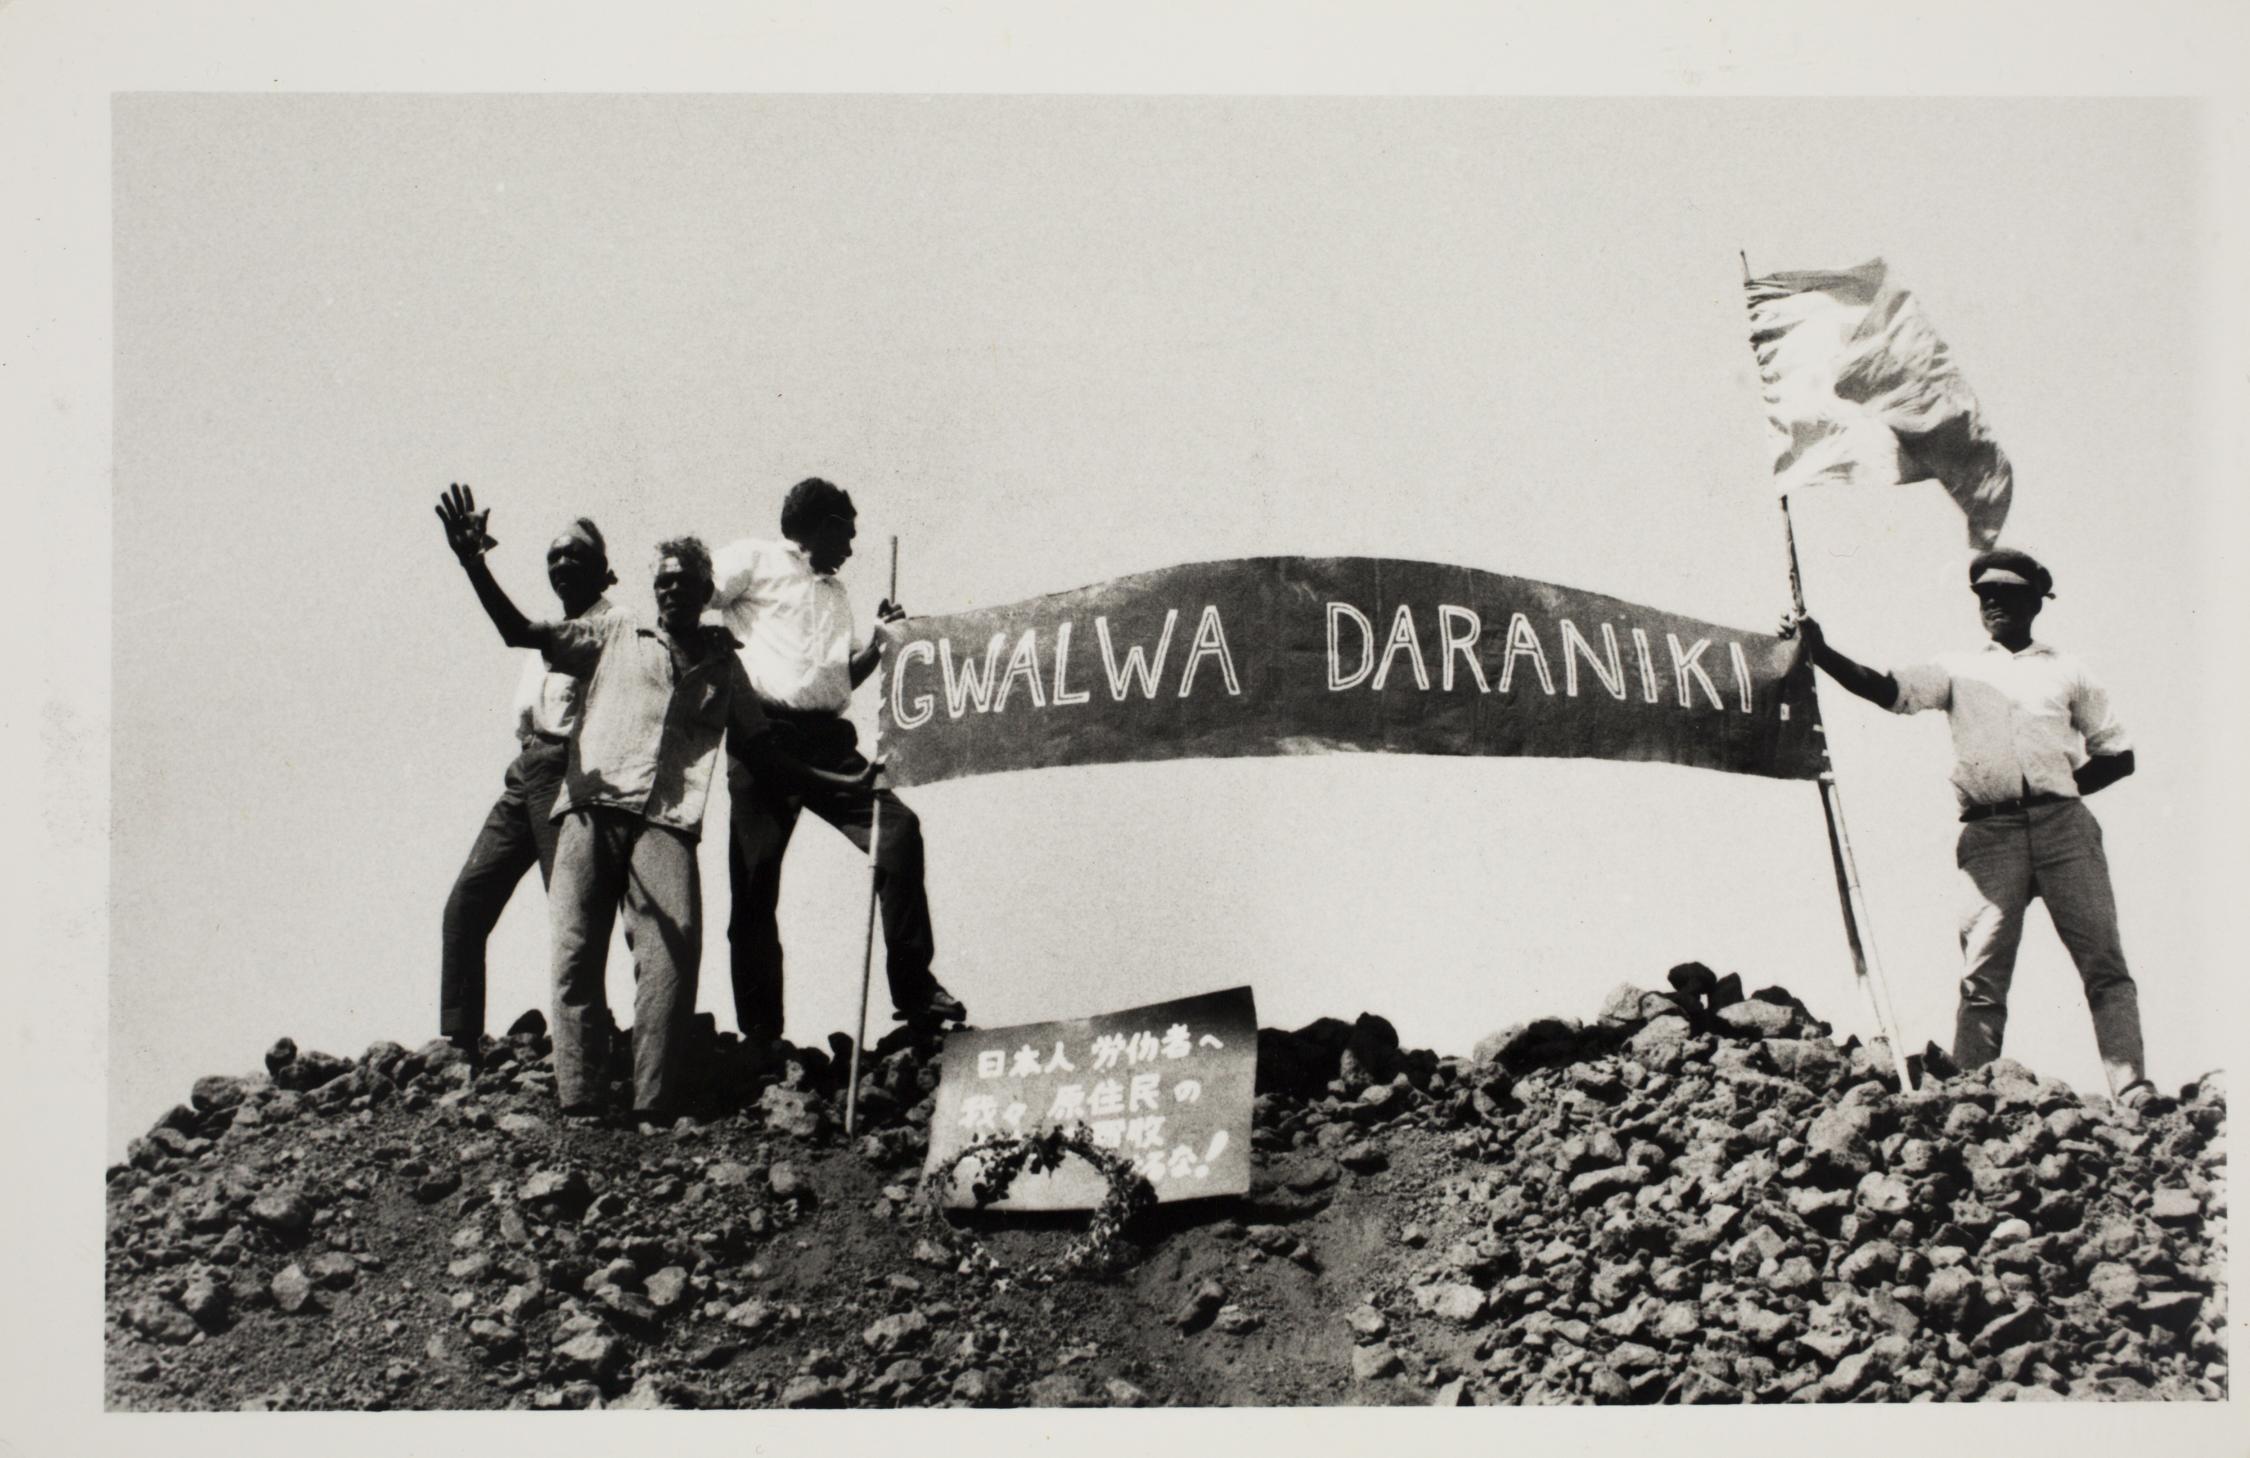 Four men standing on top a mountain holding a protest sign that reads "Gwala Daraniki" meaning "Our Land"